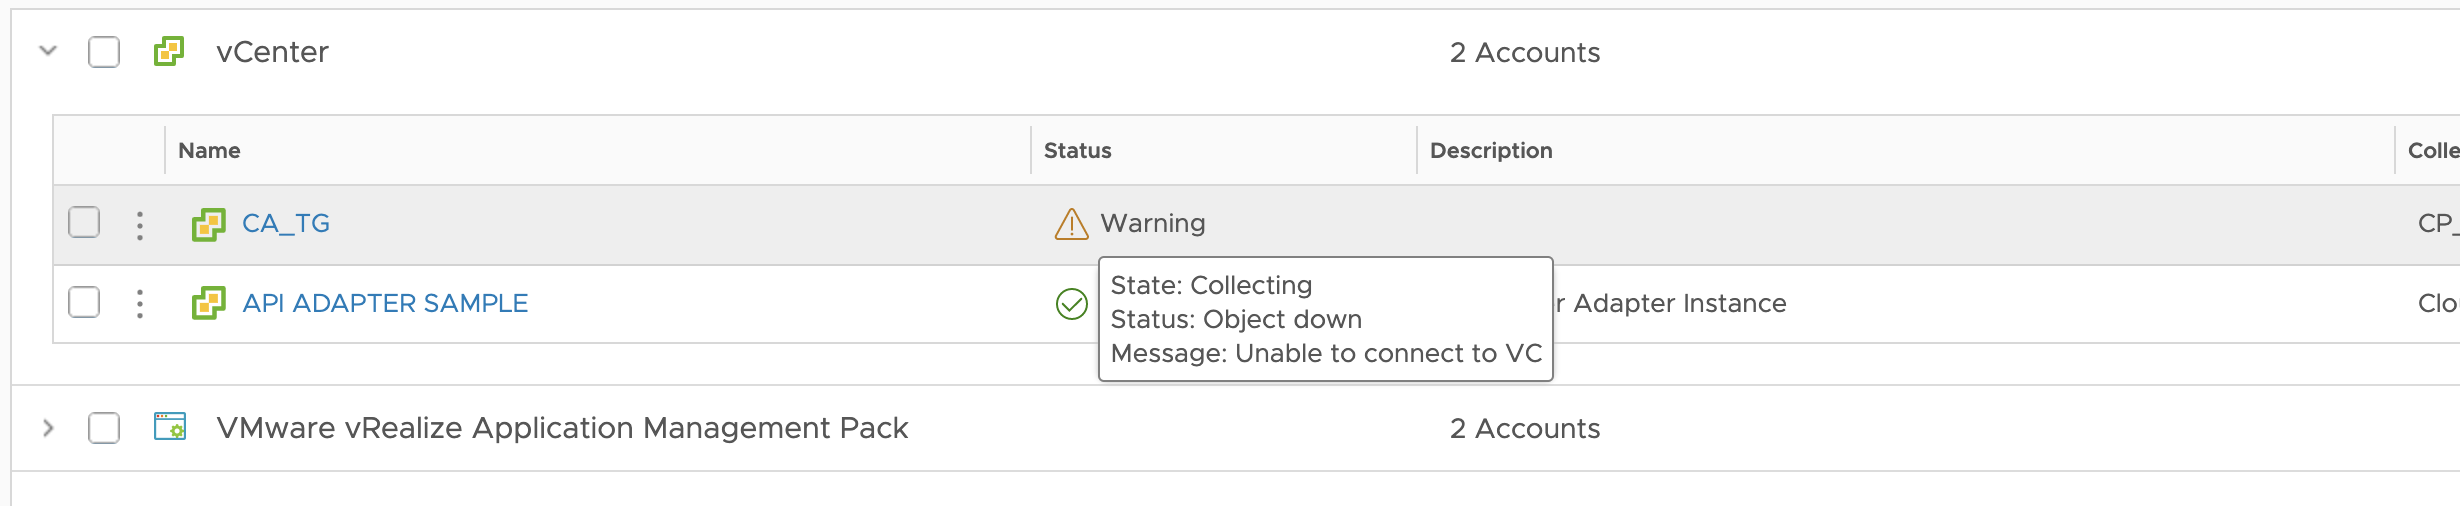 The cloud proxy is collecting data but the object is down and it is unable to connect to the vCenter.